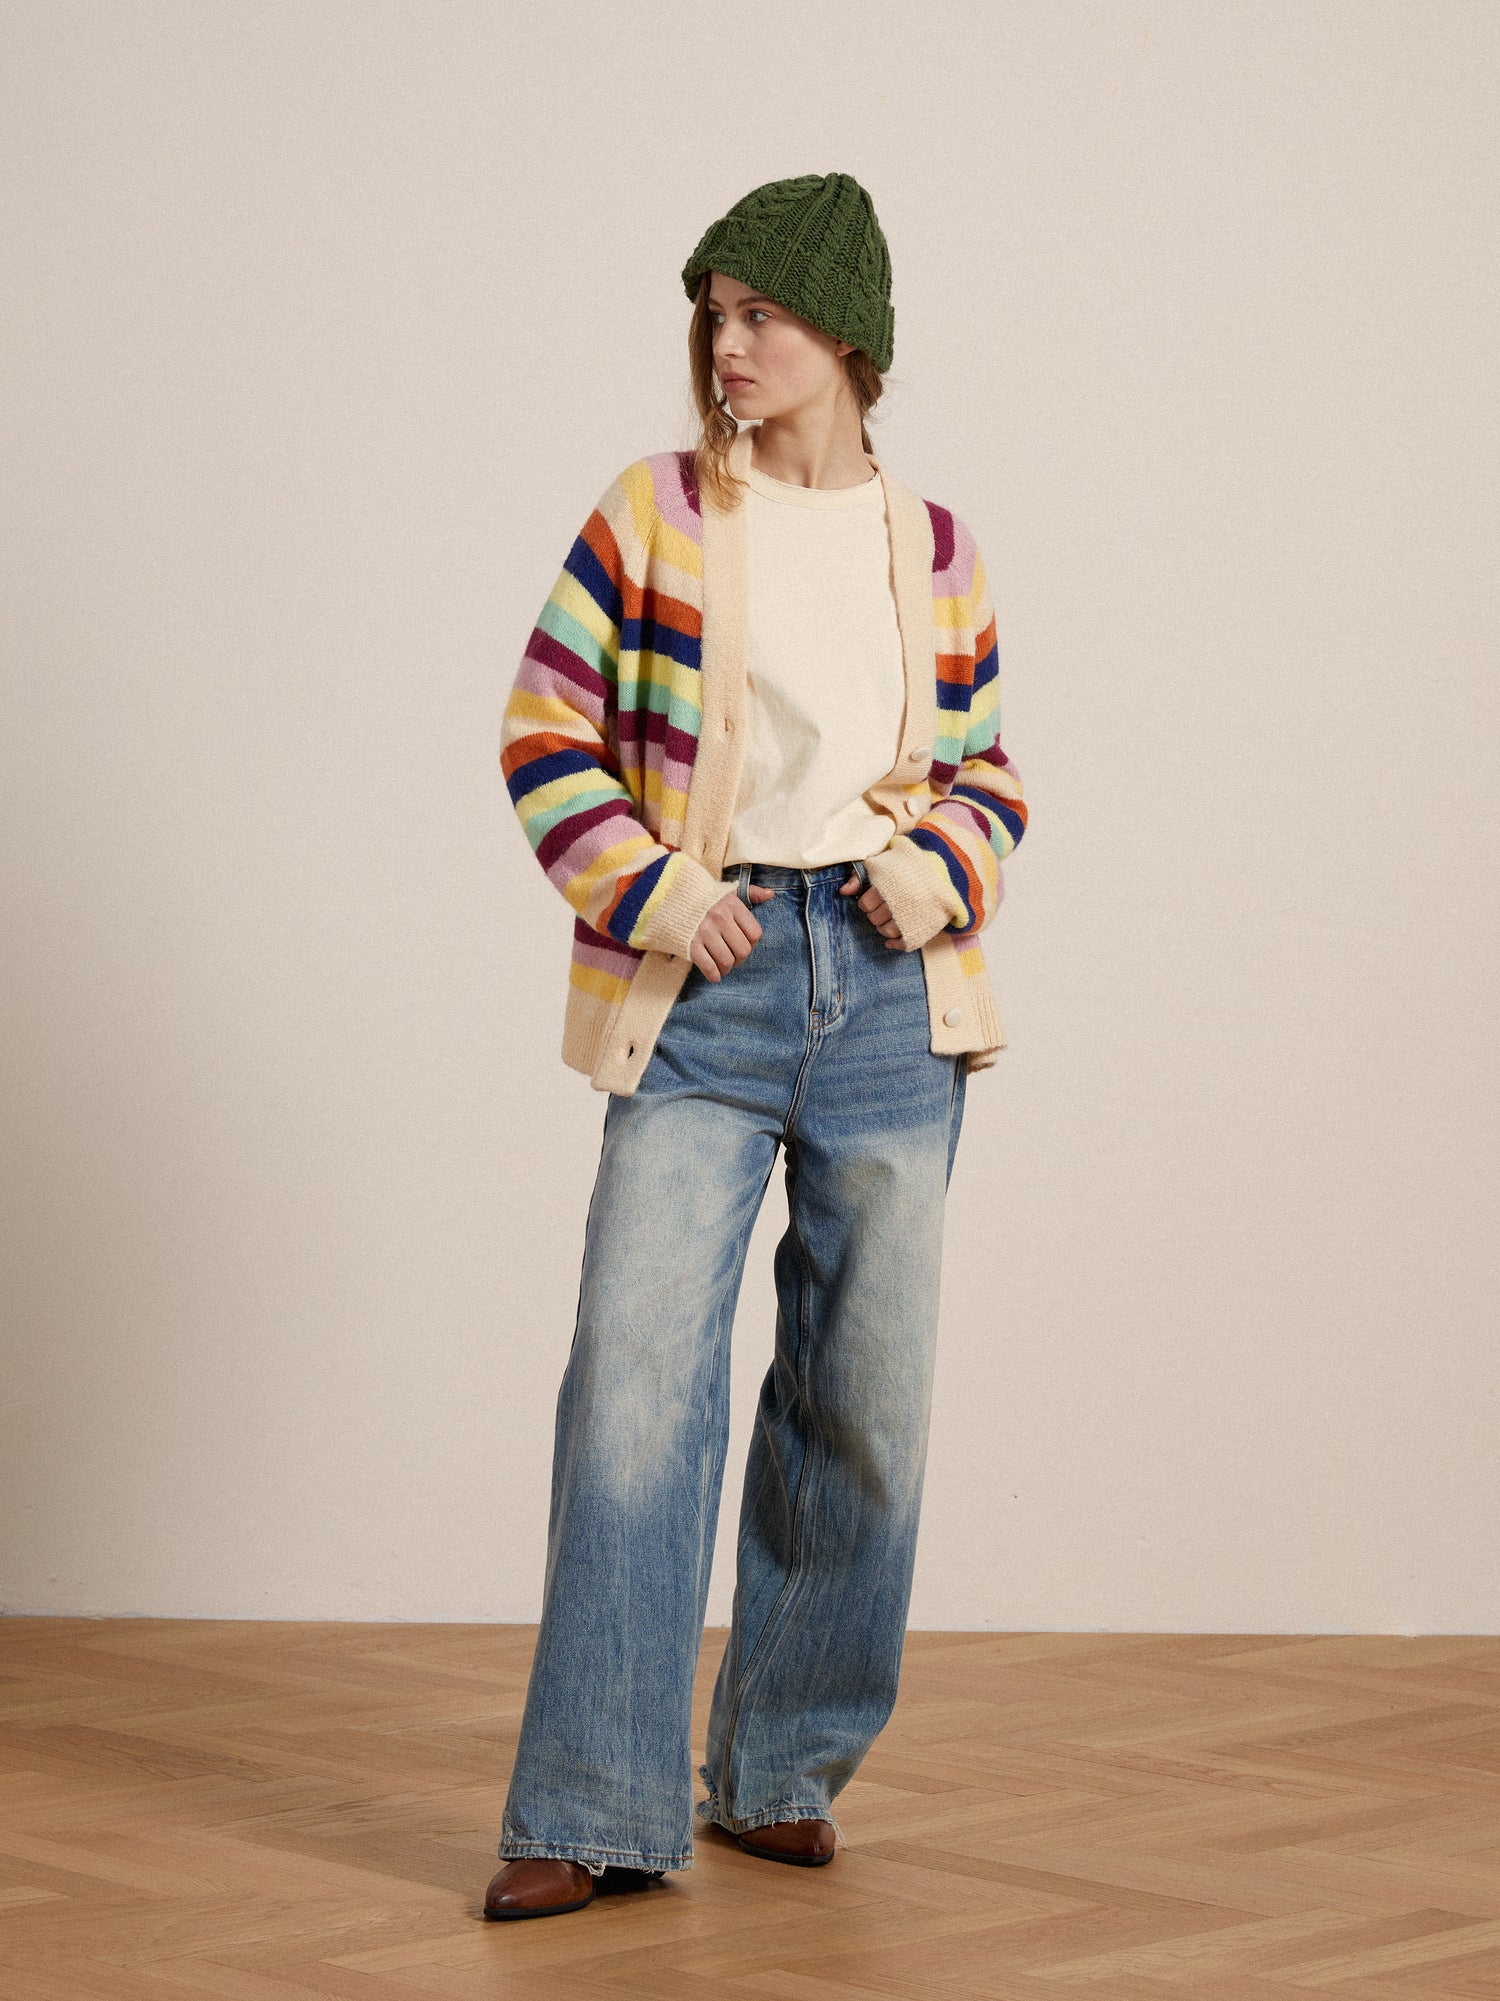 A woman wearing a vibrant-hued Found Razi Multi Stripe Cardigan and jeans.